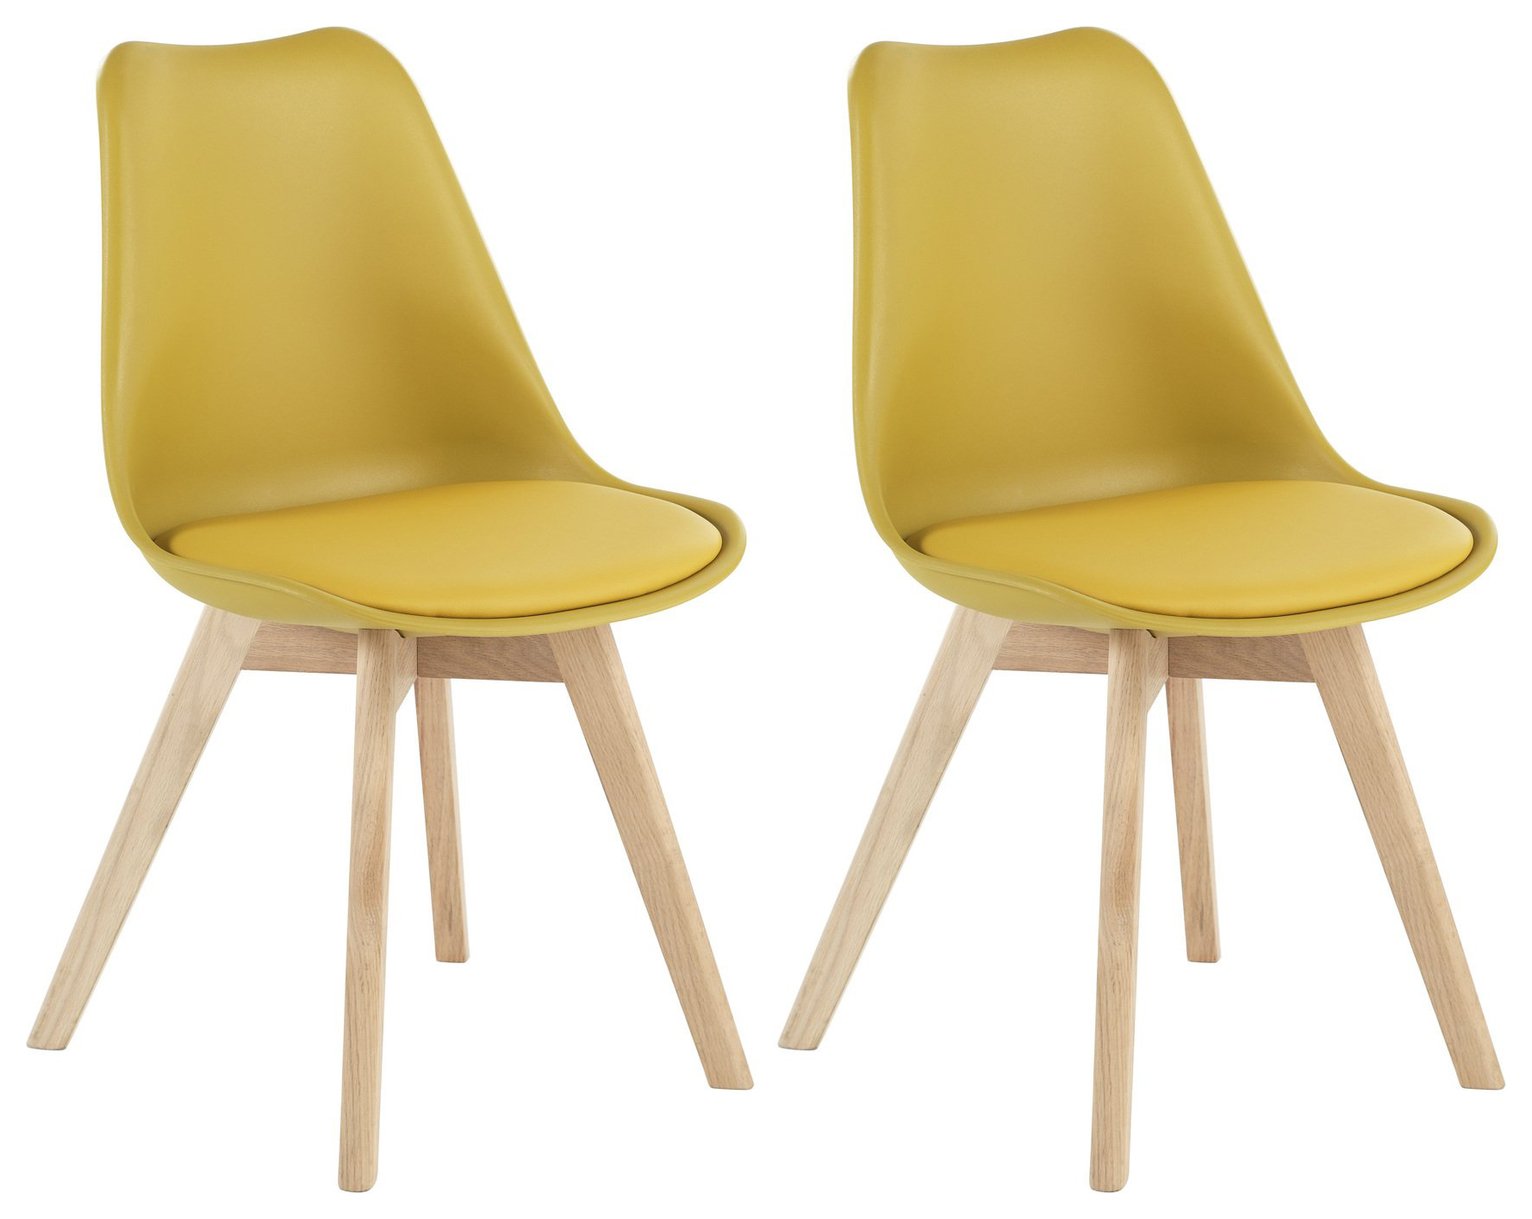 Habitat Jerry Pair of Dining Chairs - Mustard Review